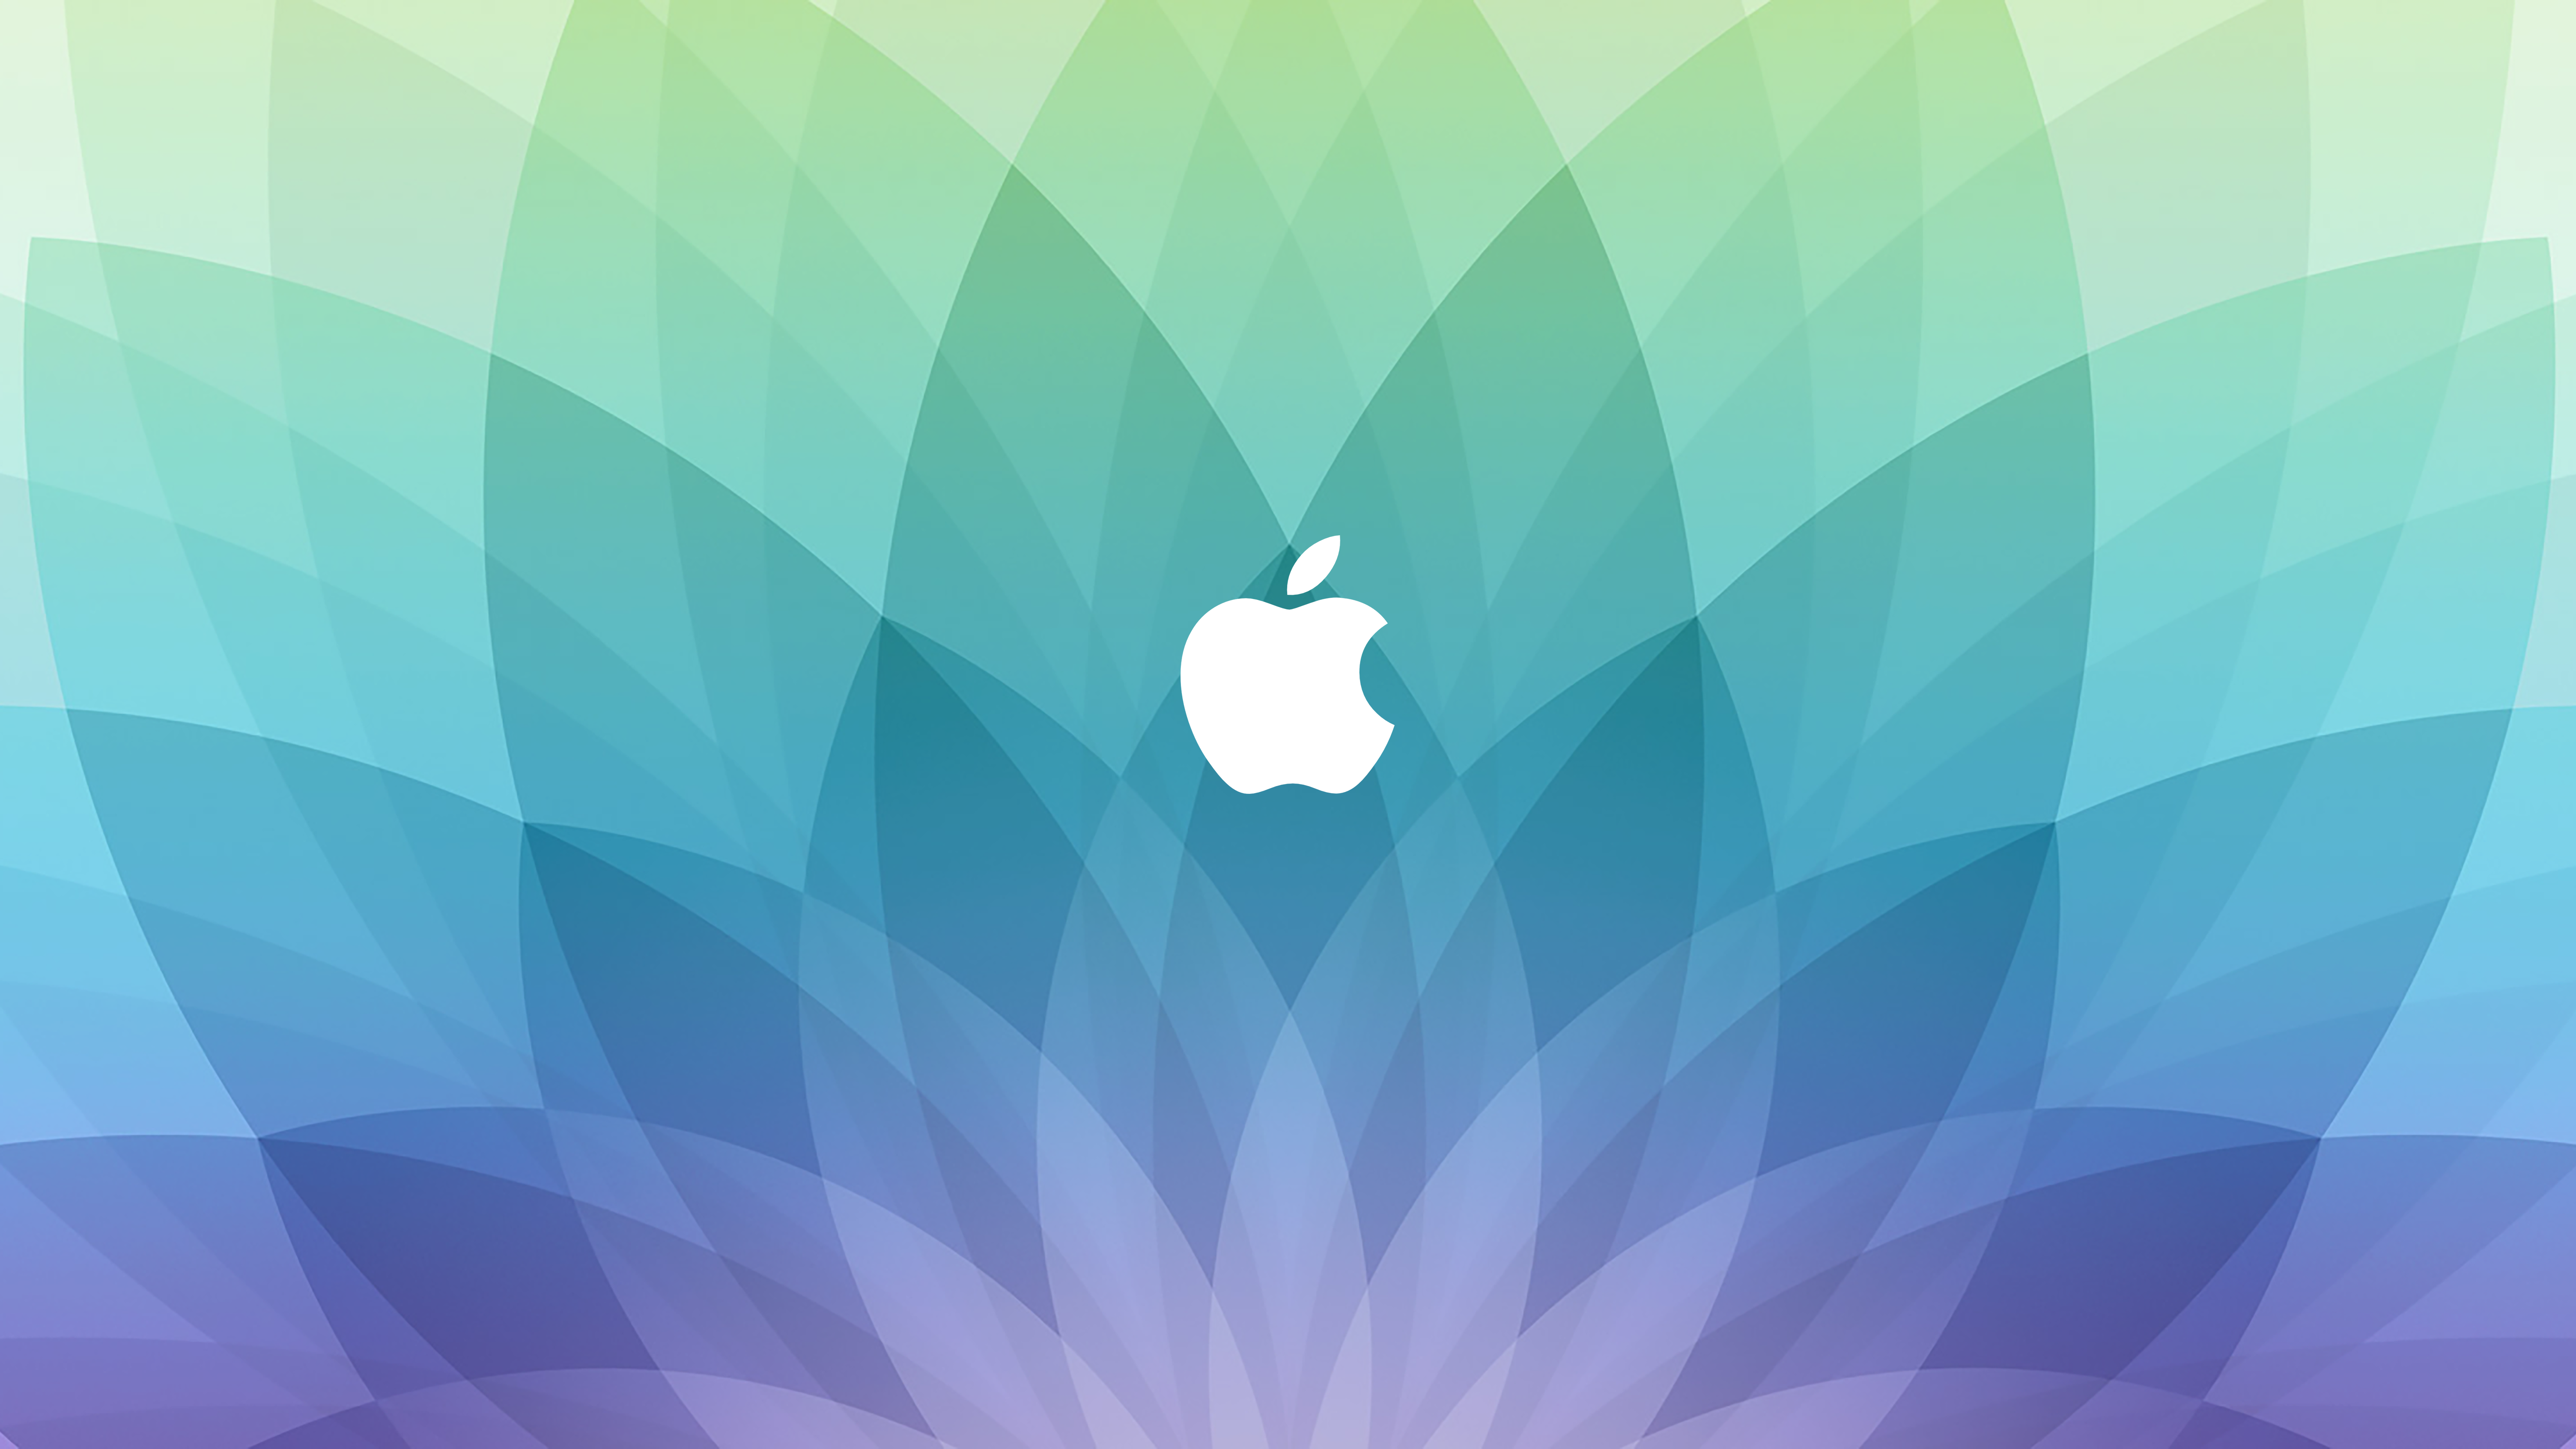 Apple Watch event wallpapers Spring Forward